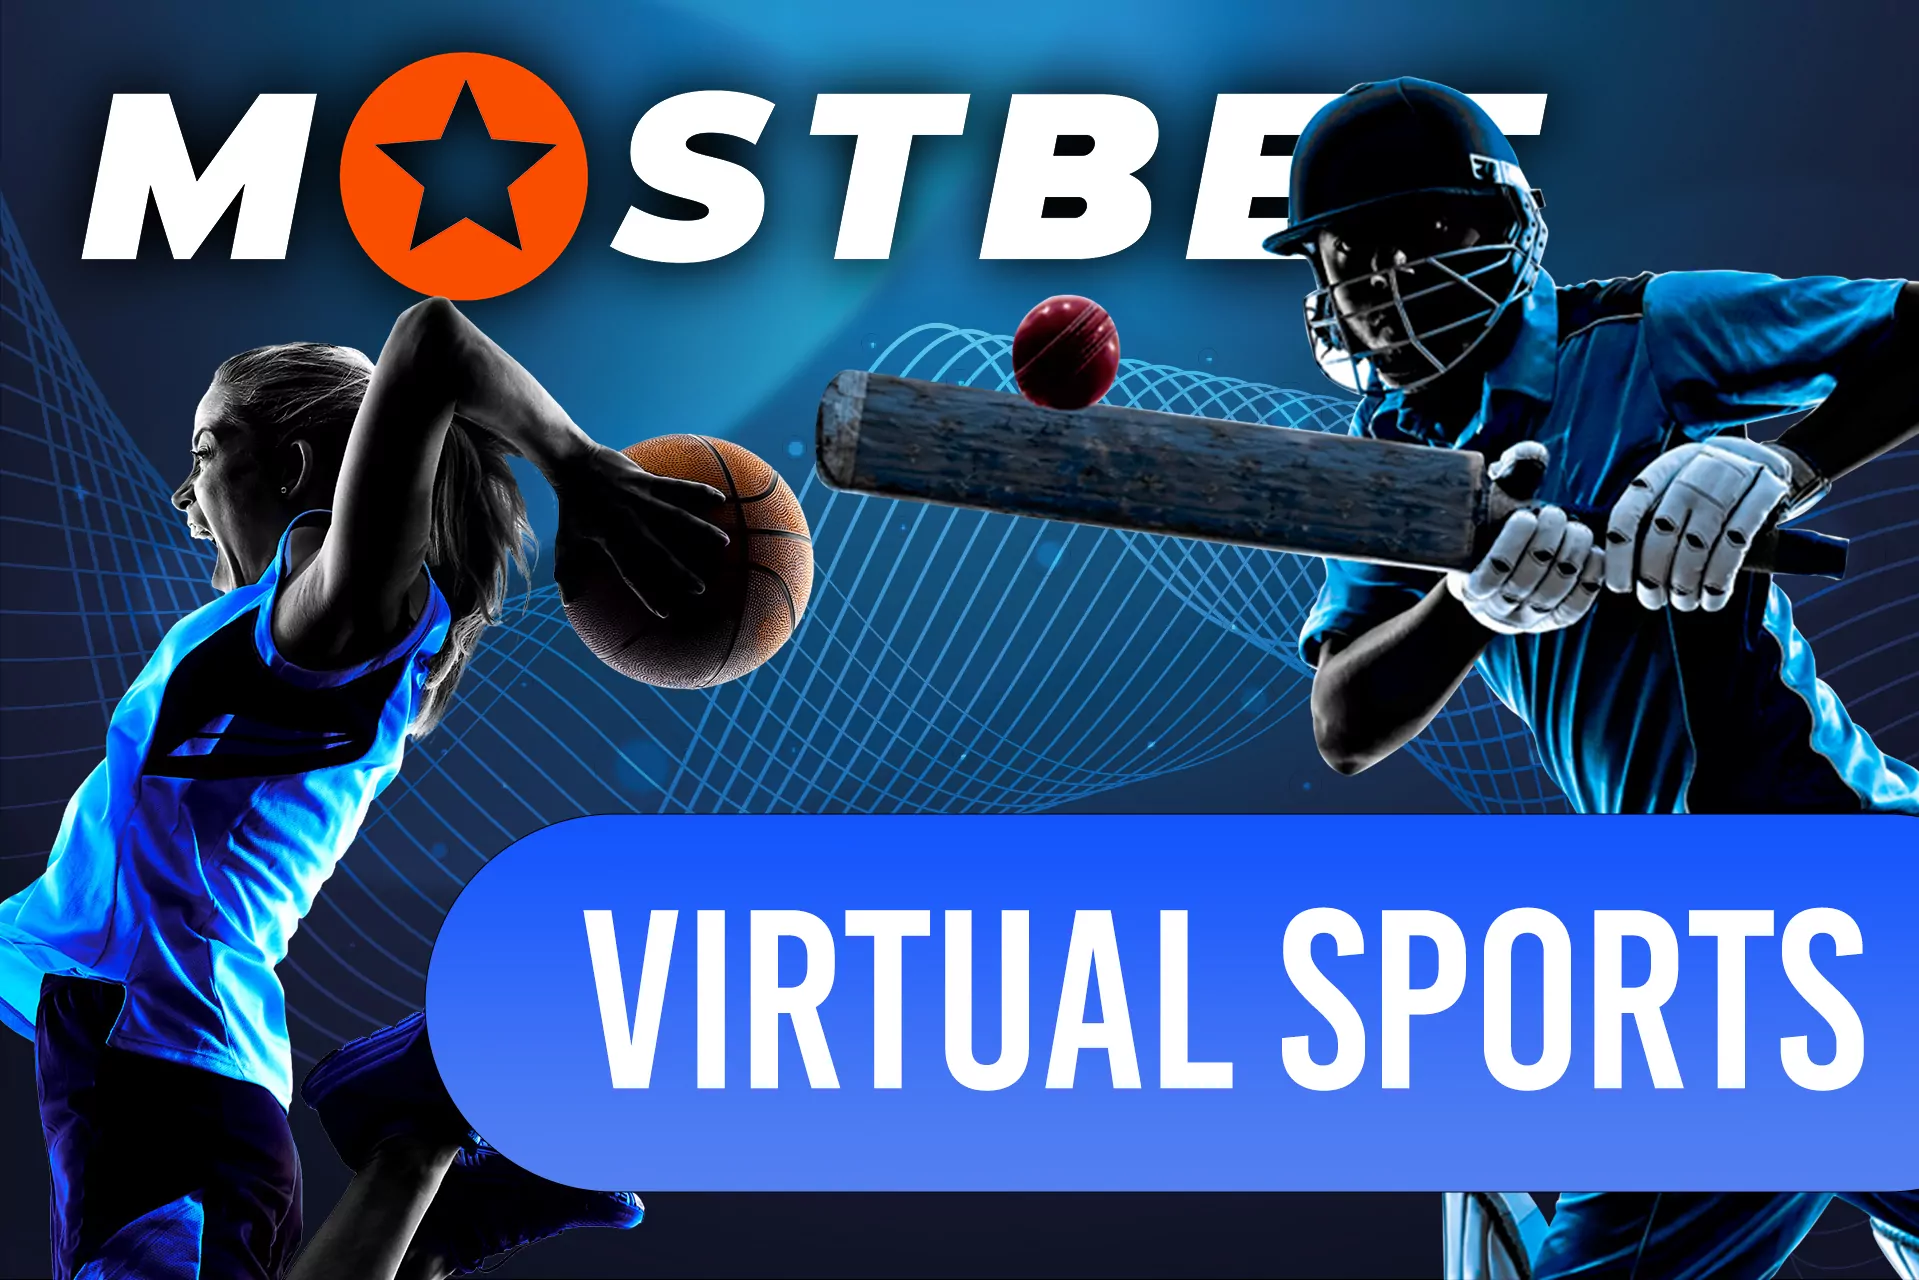 Bet on virtual sports events with Mostbet.